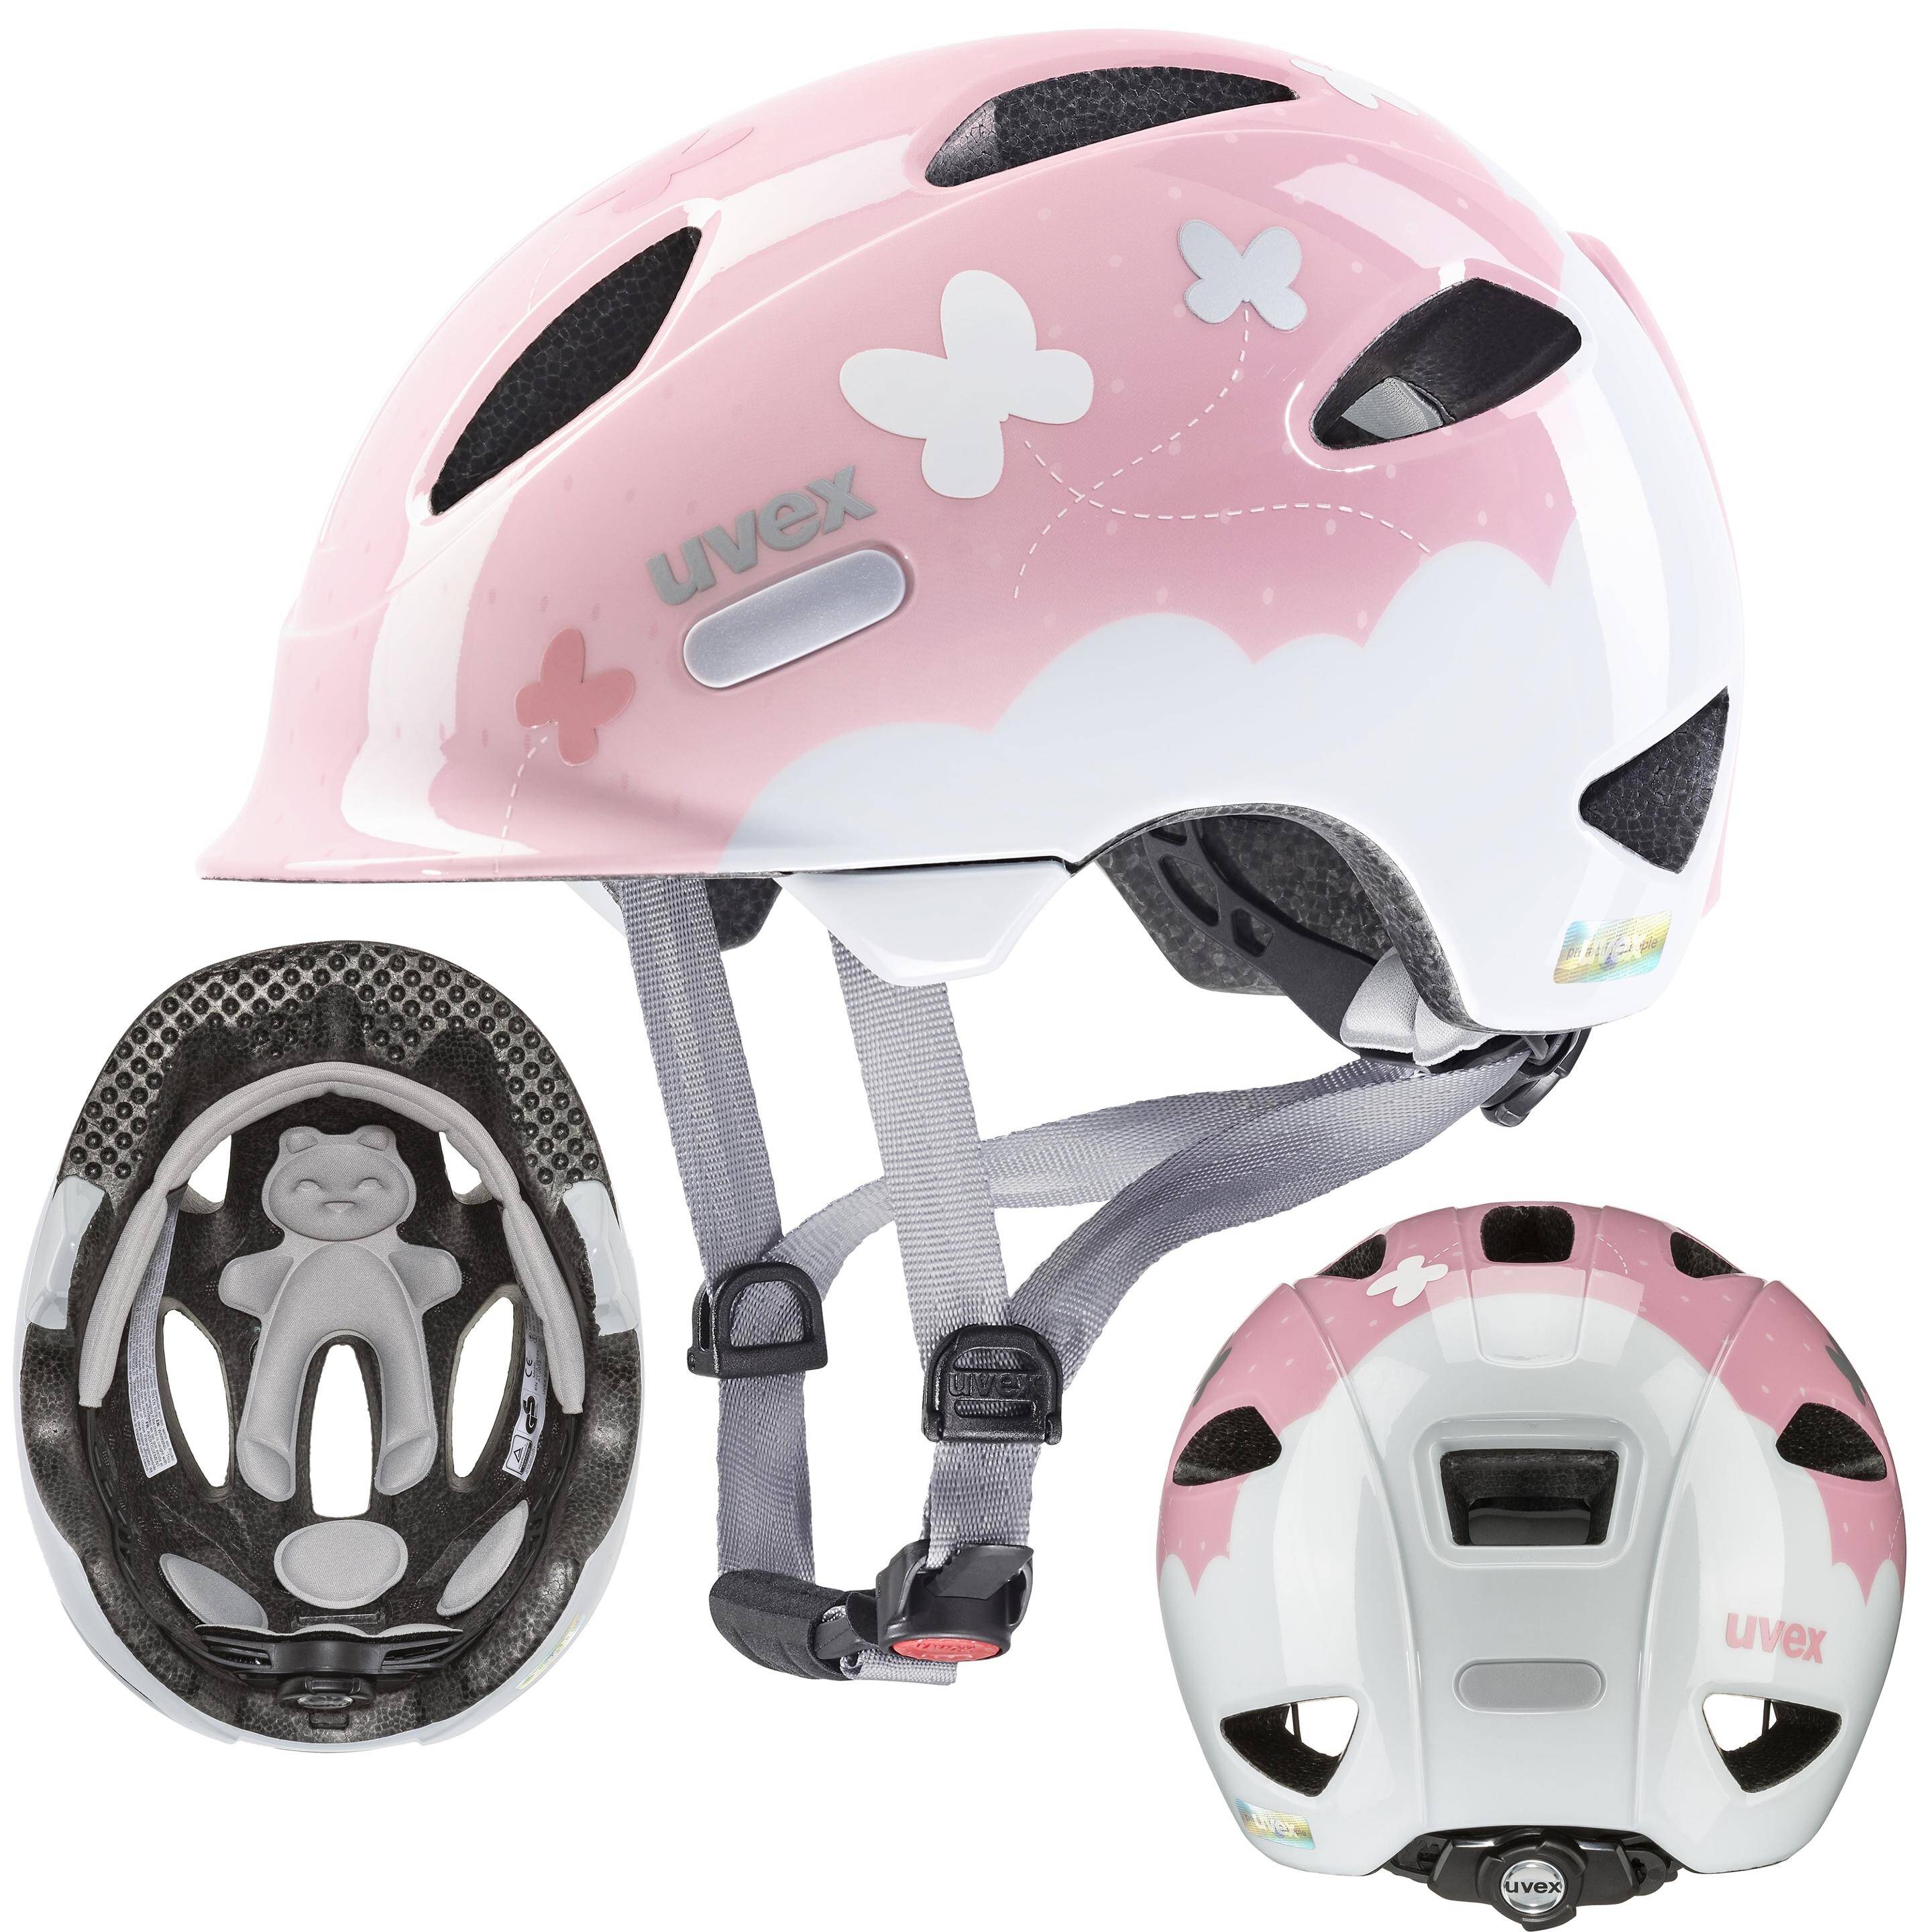 Kask Uvex Oyo Style 45-50cm butterfly